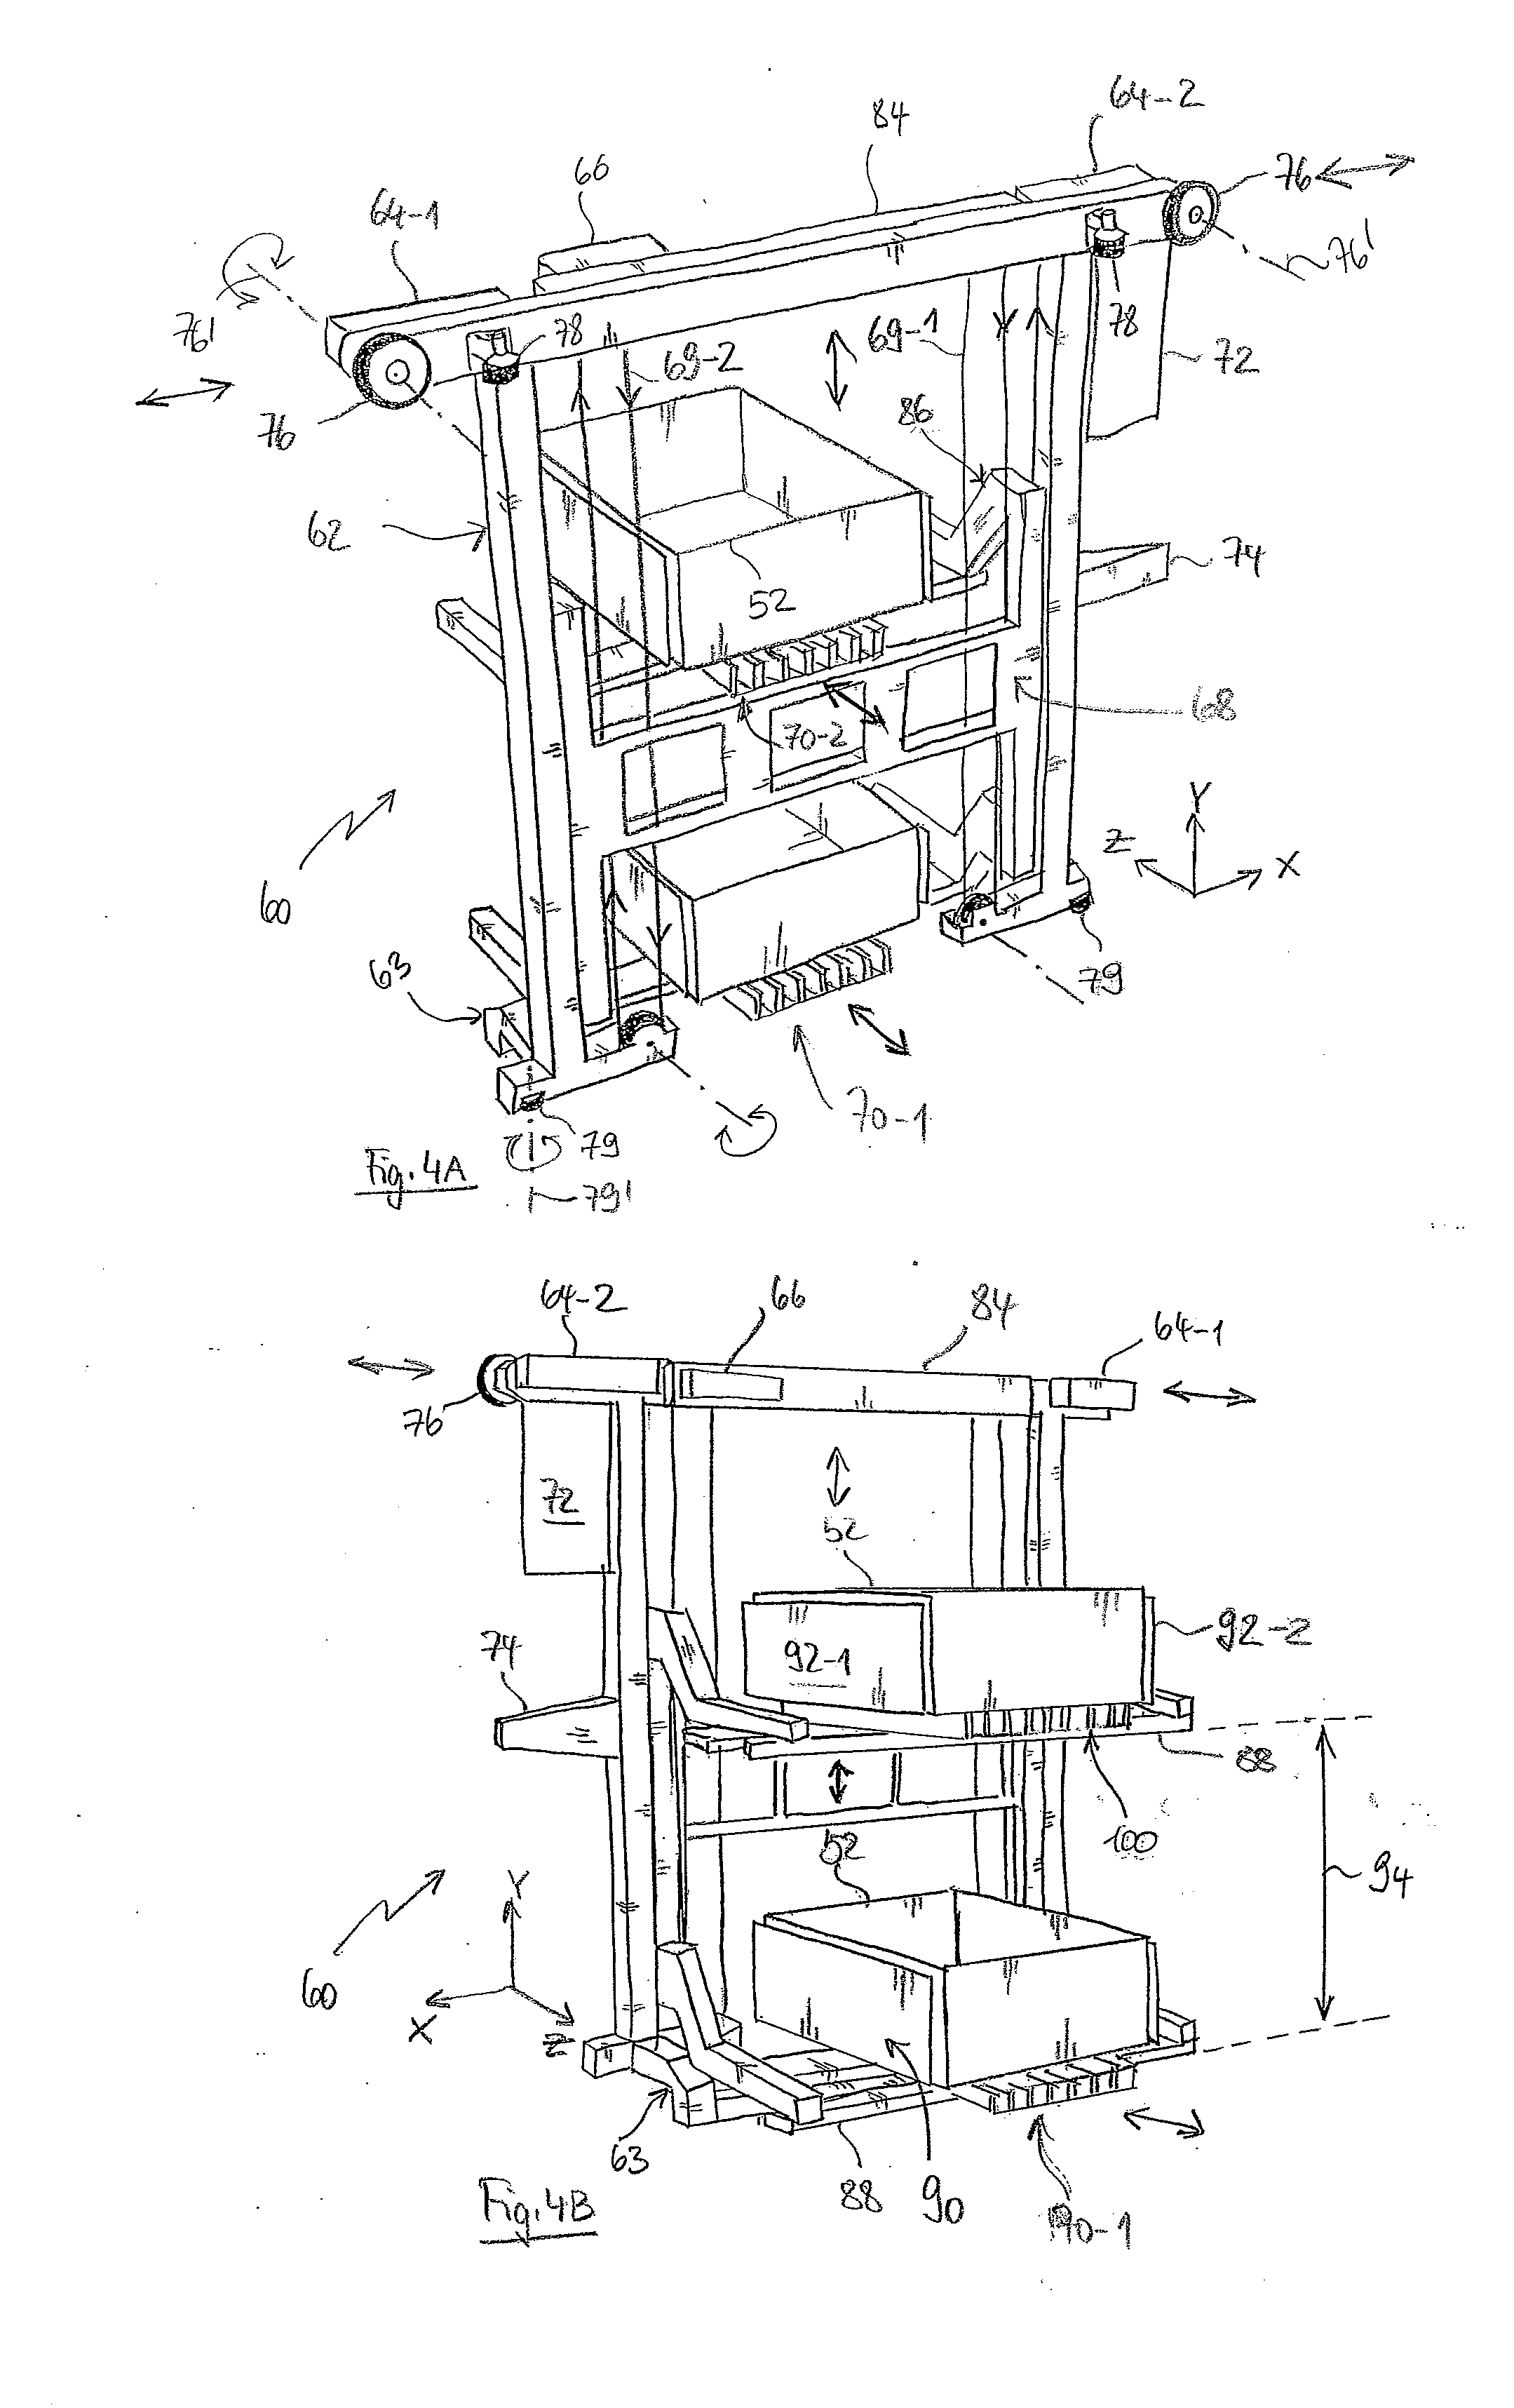 Storage and order-picking system comprising a shuttle